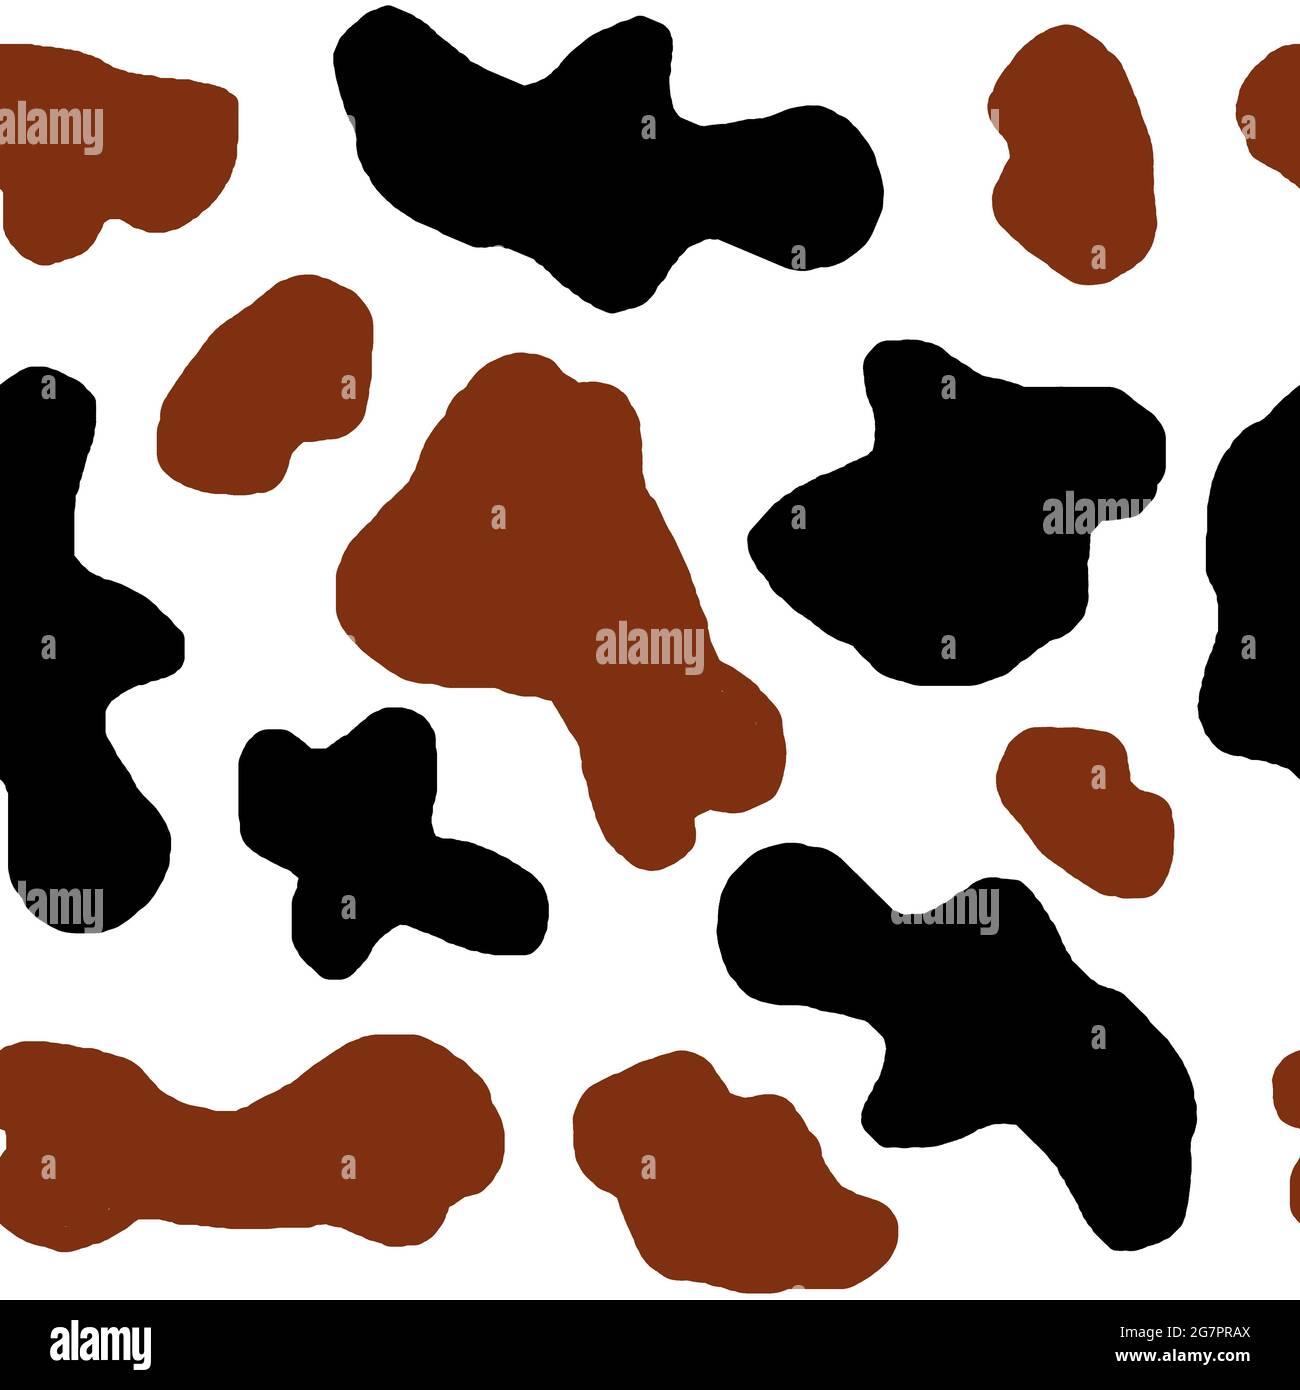 39+ Thousand Cow Print Background Royalty-Free Images, Stock